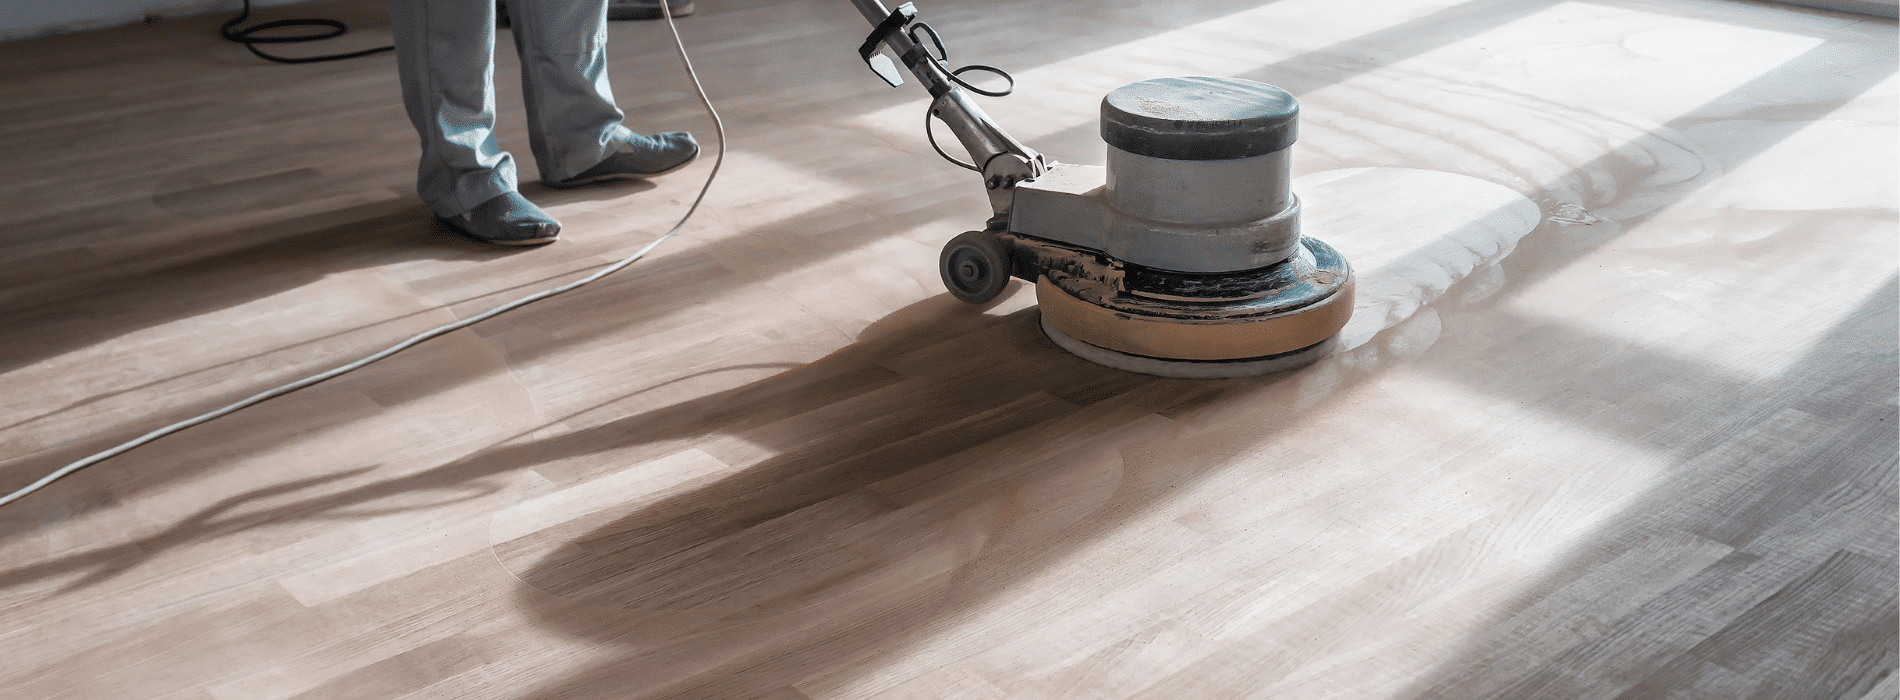 Using a Bona FlexiSand 1.9 buffer sander in Wandsworth, SW18, with a 407 mm diameter and 1.9 kW of power. It is powered by 230 V and operates at 50/60 Hz. This powerful tool is connected to a HEPA-filtered dust extraction system, guaranteeing a tidy and effective result.

